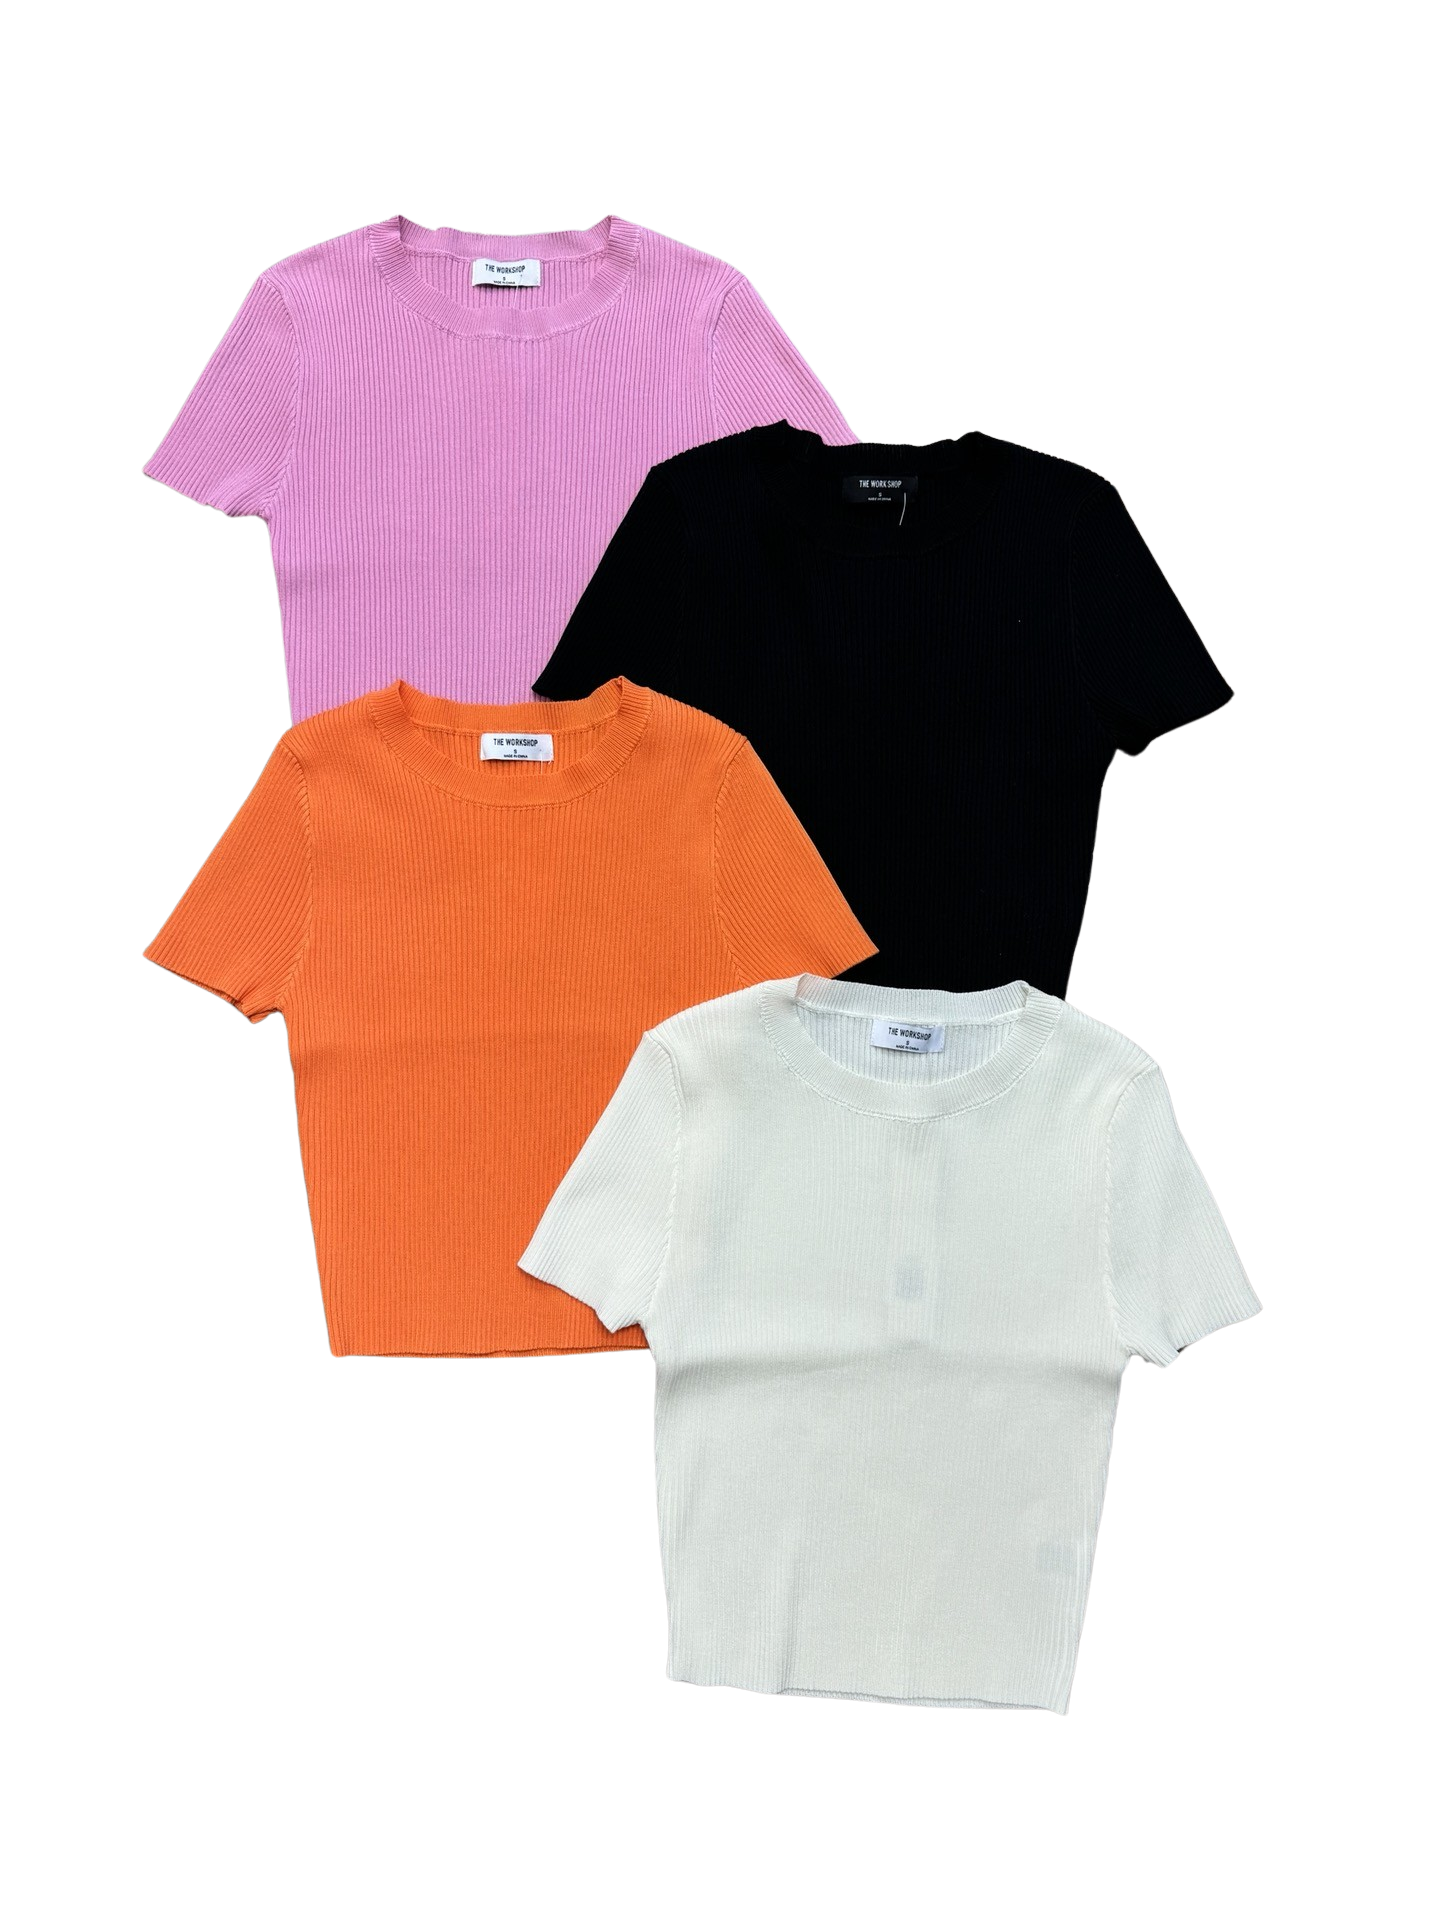 Apparel- The Workshop Scoop Neck Ribbed Fitted Tee